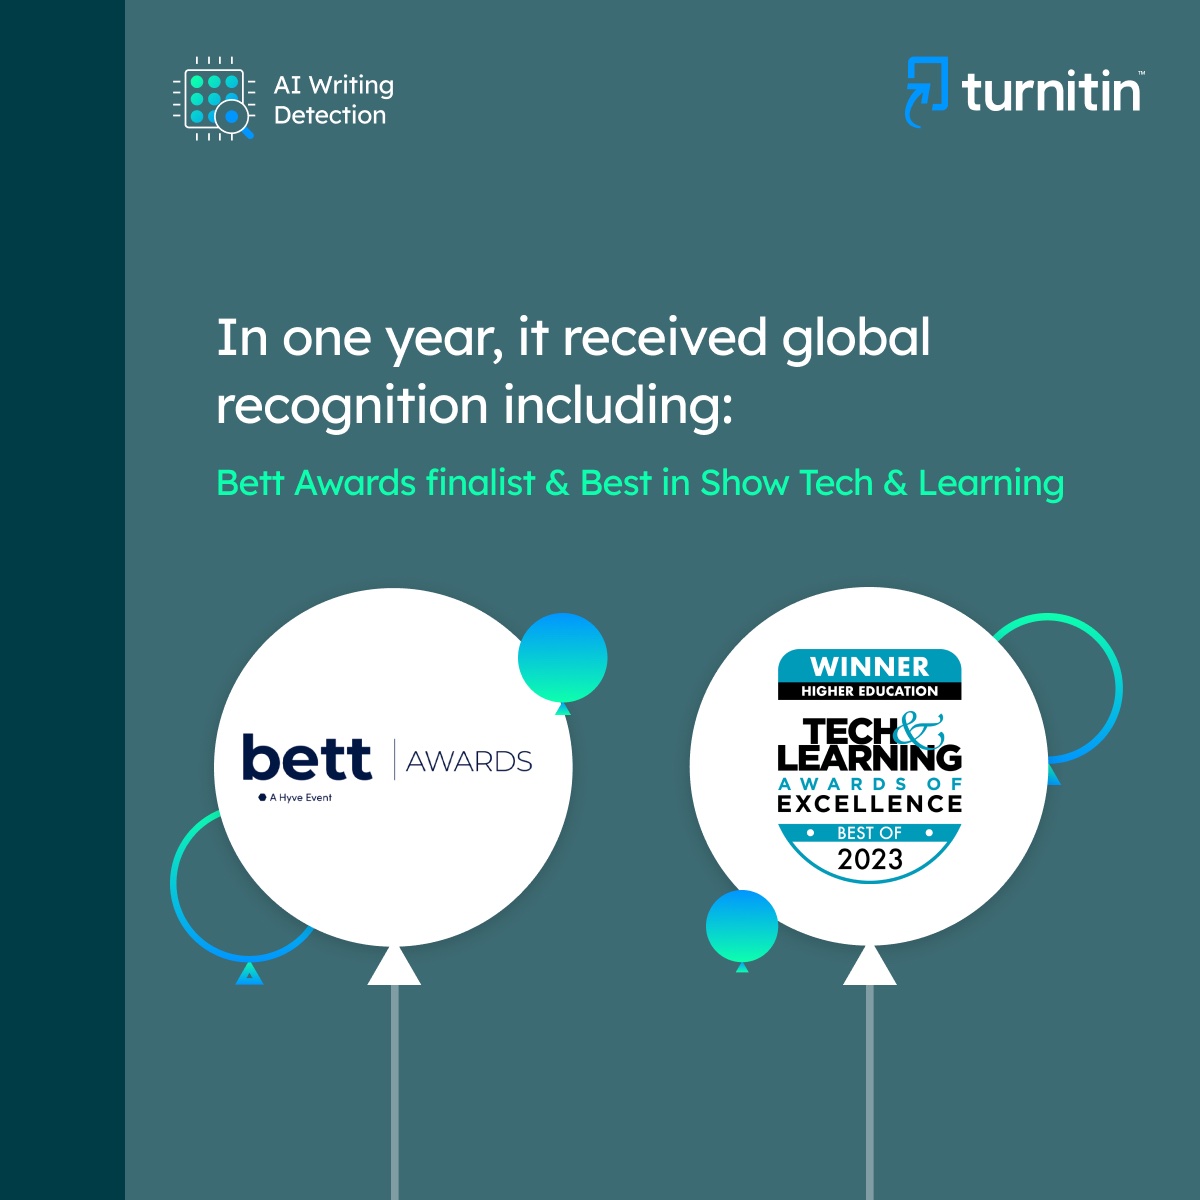 With over 200 million papers reviewed since the launch of Turnitin's #AIWriting detection feature in April 2023, Turnitin's data on the presence of AI writing in student work indicates continued use of AI in writing submissions. turnitin.com/press/press-de… #educationtechnology